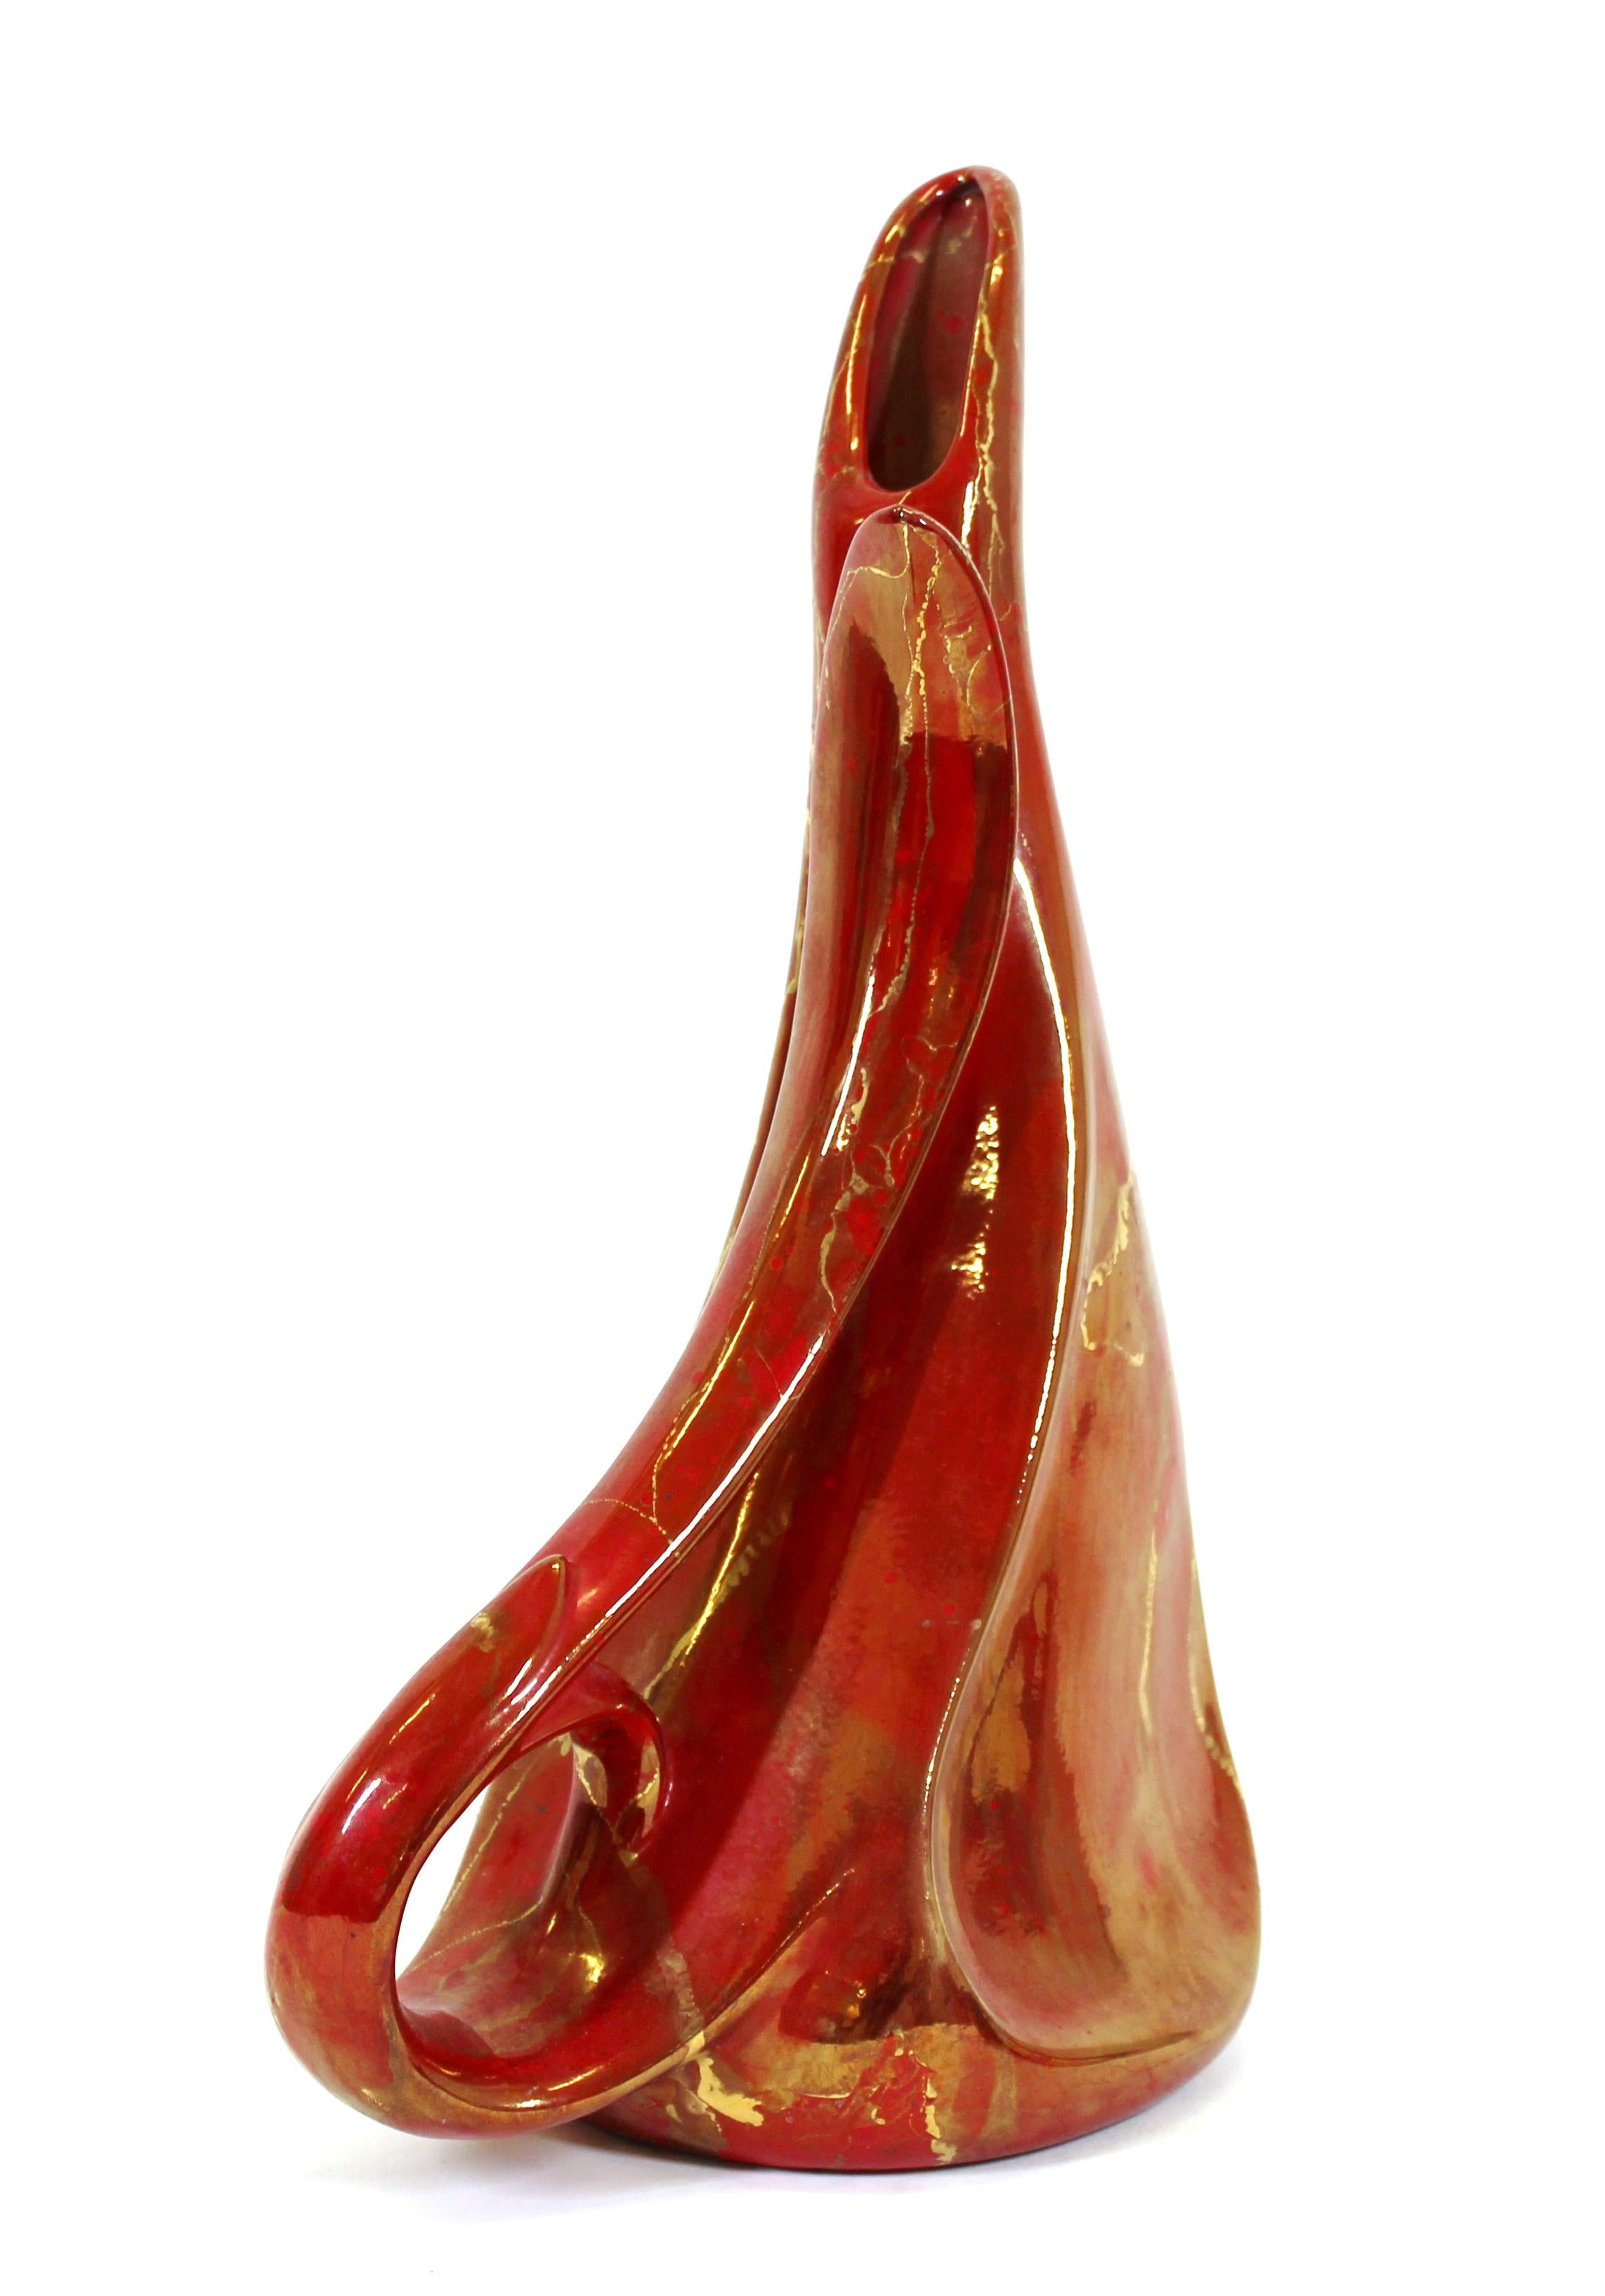 Art Nouveau revival style red ceramic pitcher with partial gold glaze, unmarked.